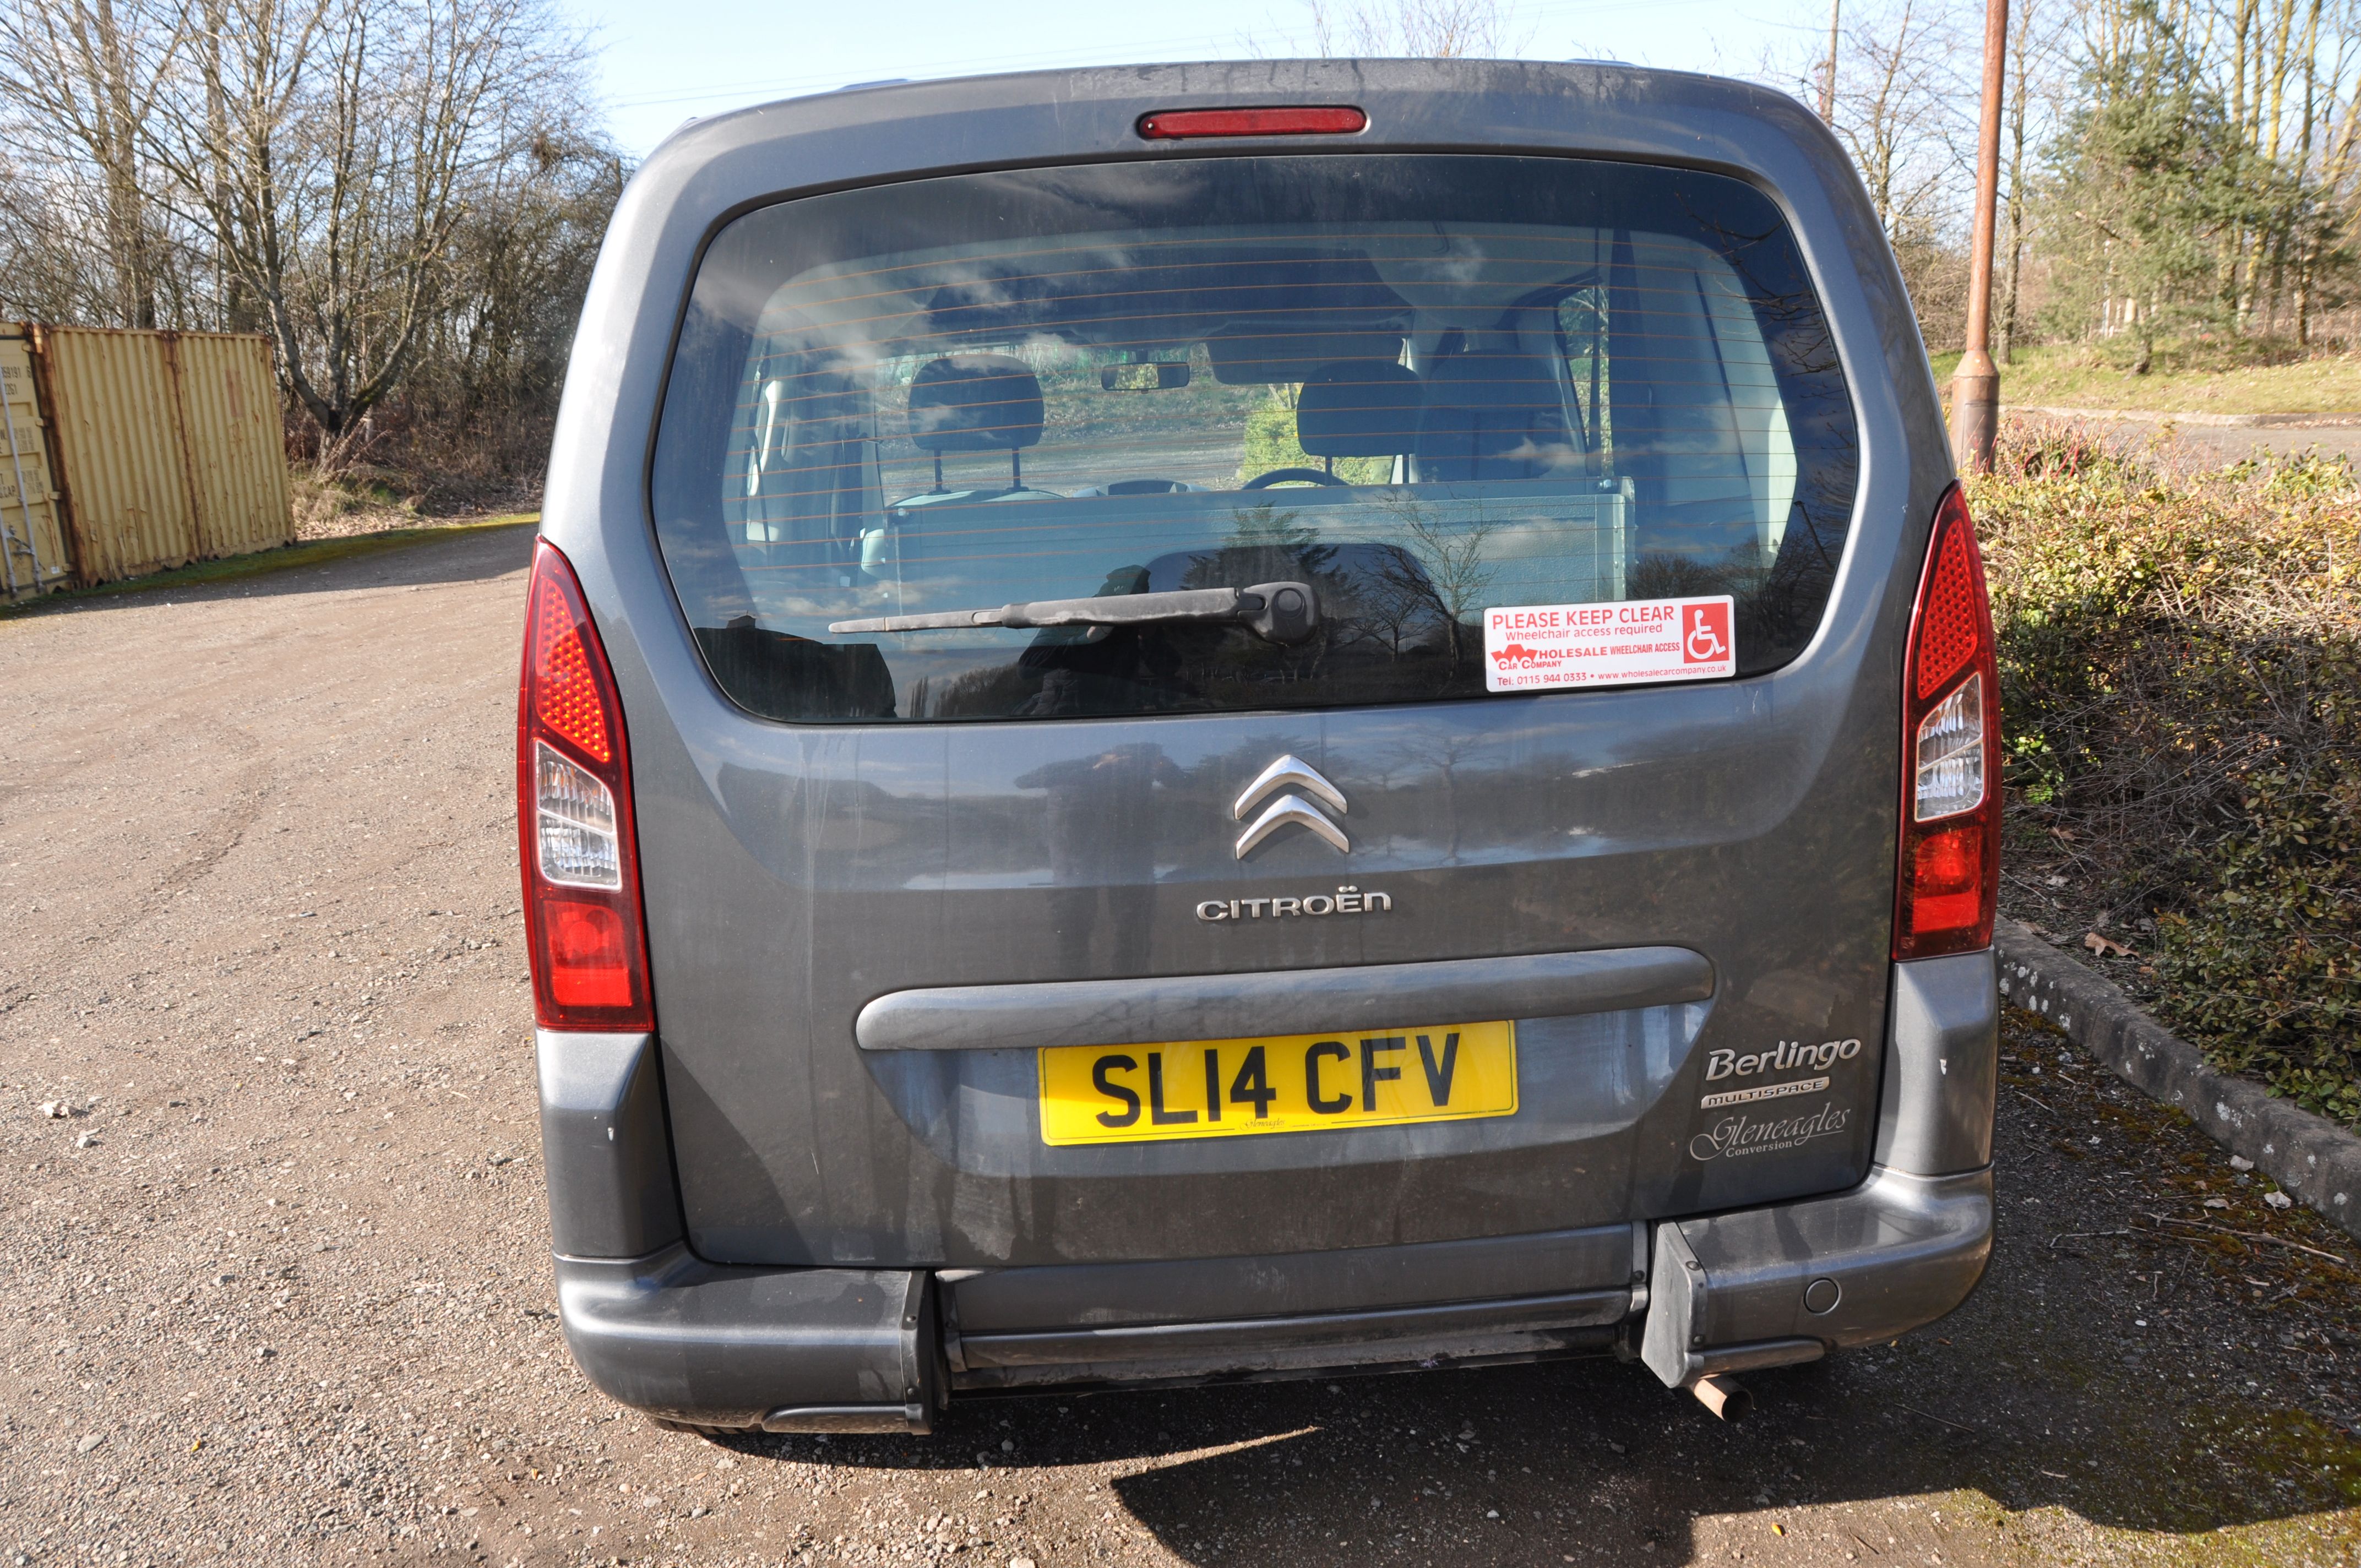 A 2014 CITROEN BERLINGO MULTISPACE GLENEAGLES CONVERSION in grey with two front and one rear seat - Image 5 of 11